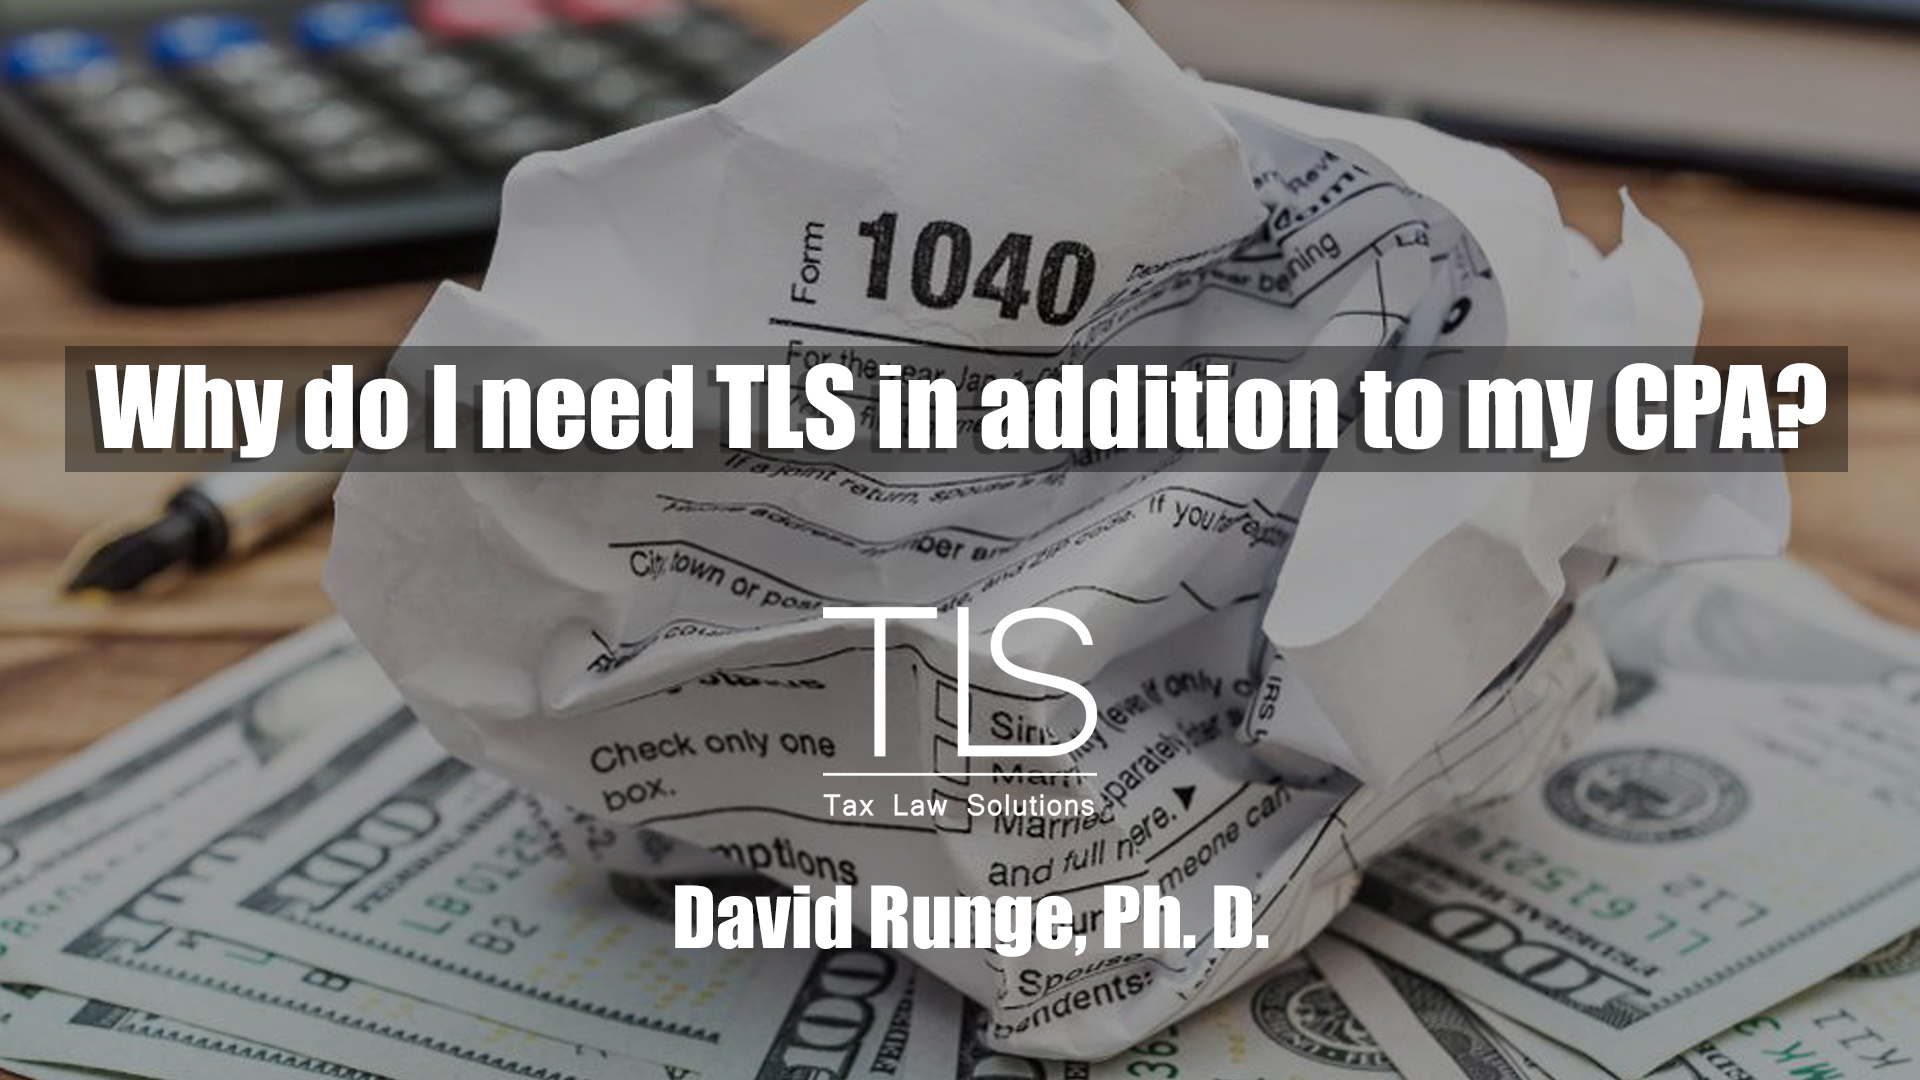 why-do-i-need-tls-in-addition-to-my-cpa2-tax-law-solutions